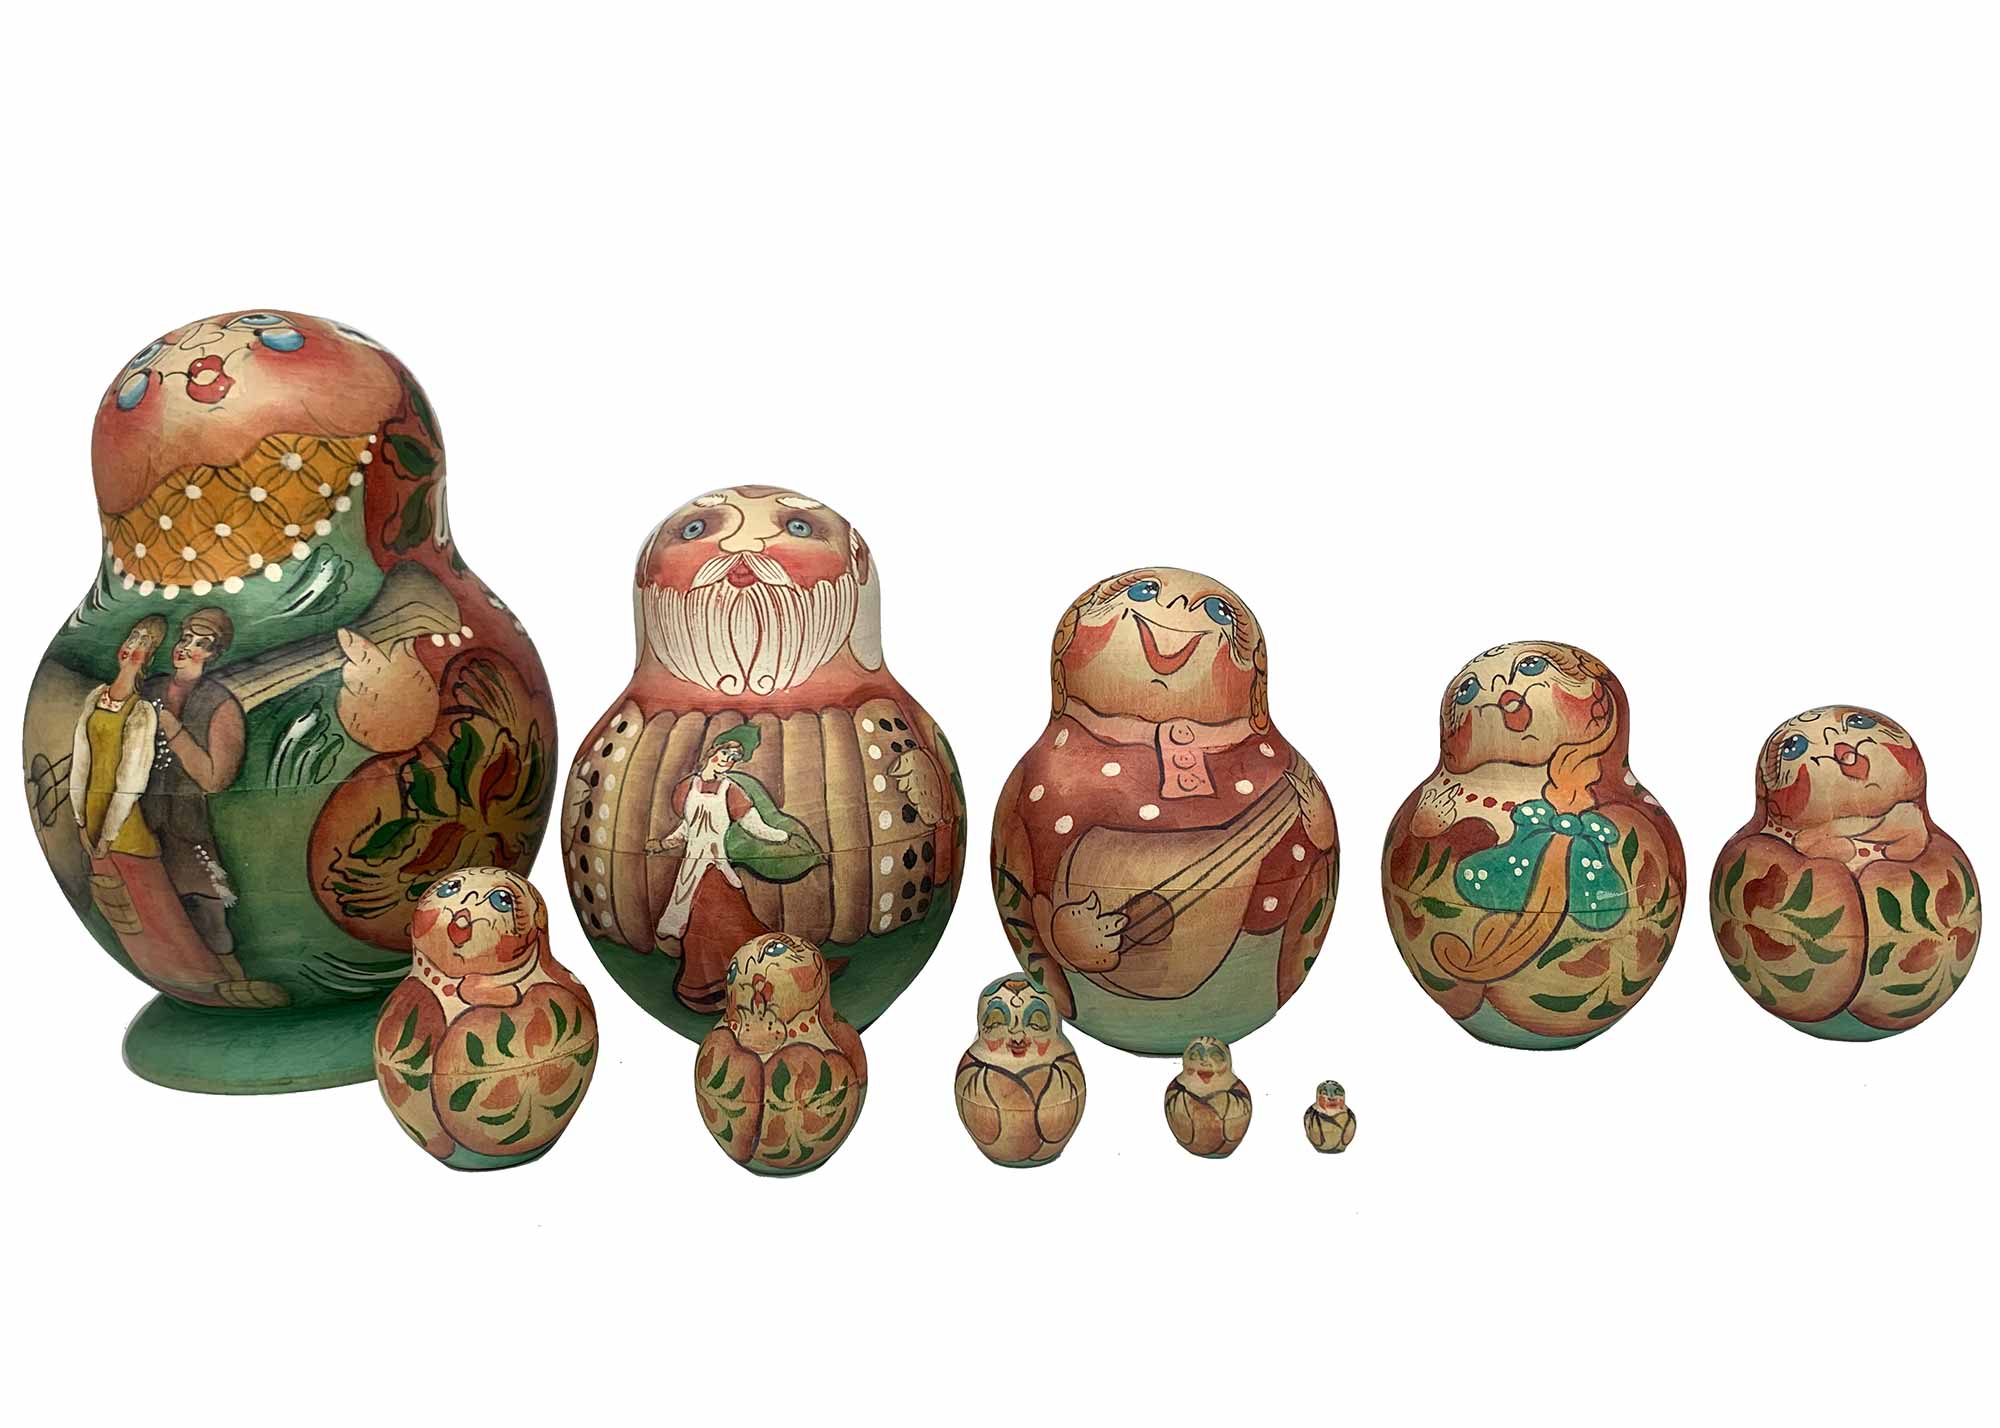 Buy Vintage "In the Home" Peasant Woman Nesting Doll 10pc./7 at GoldenCockerel.com